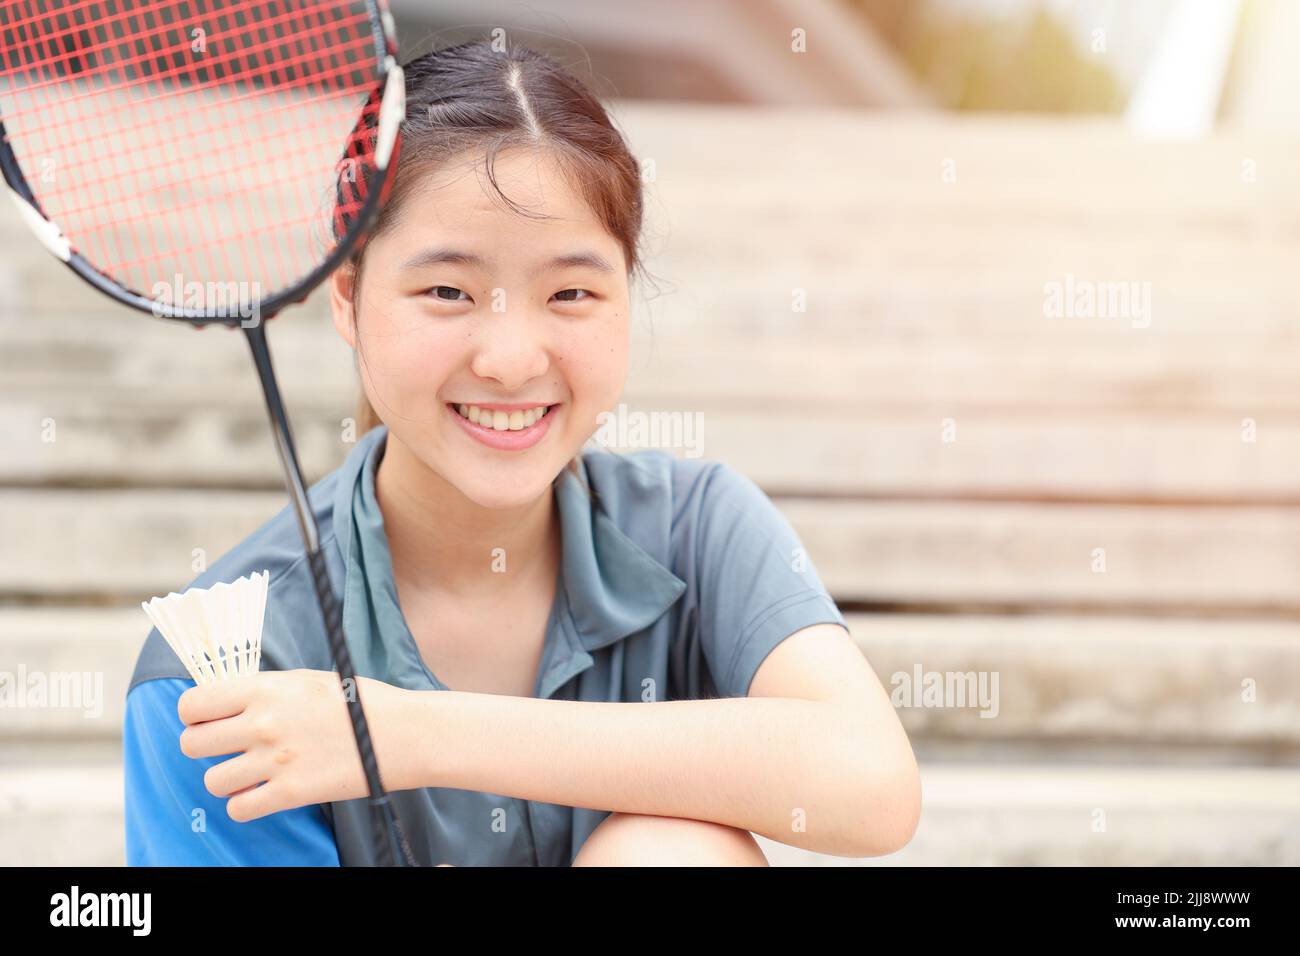 Asian Teen girl sport player with Badminton equipment for healthy outdoor portrait happy smile Stock Photo